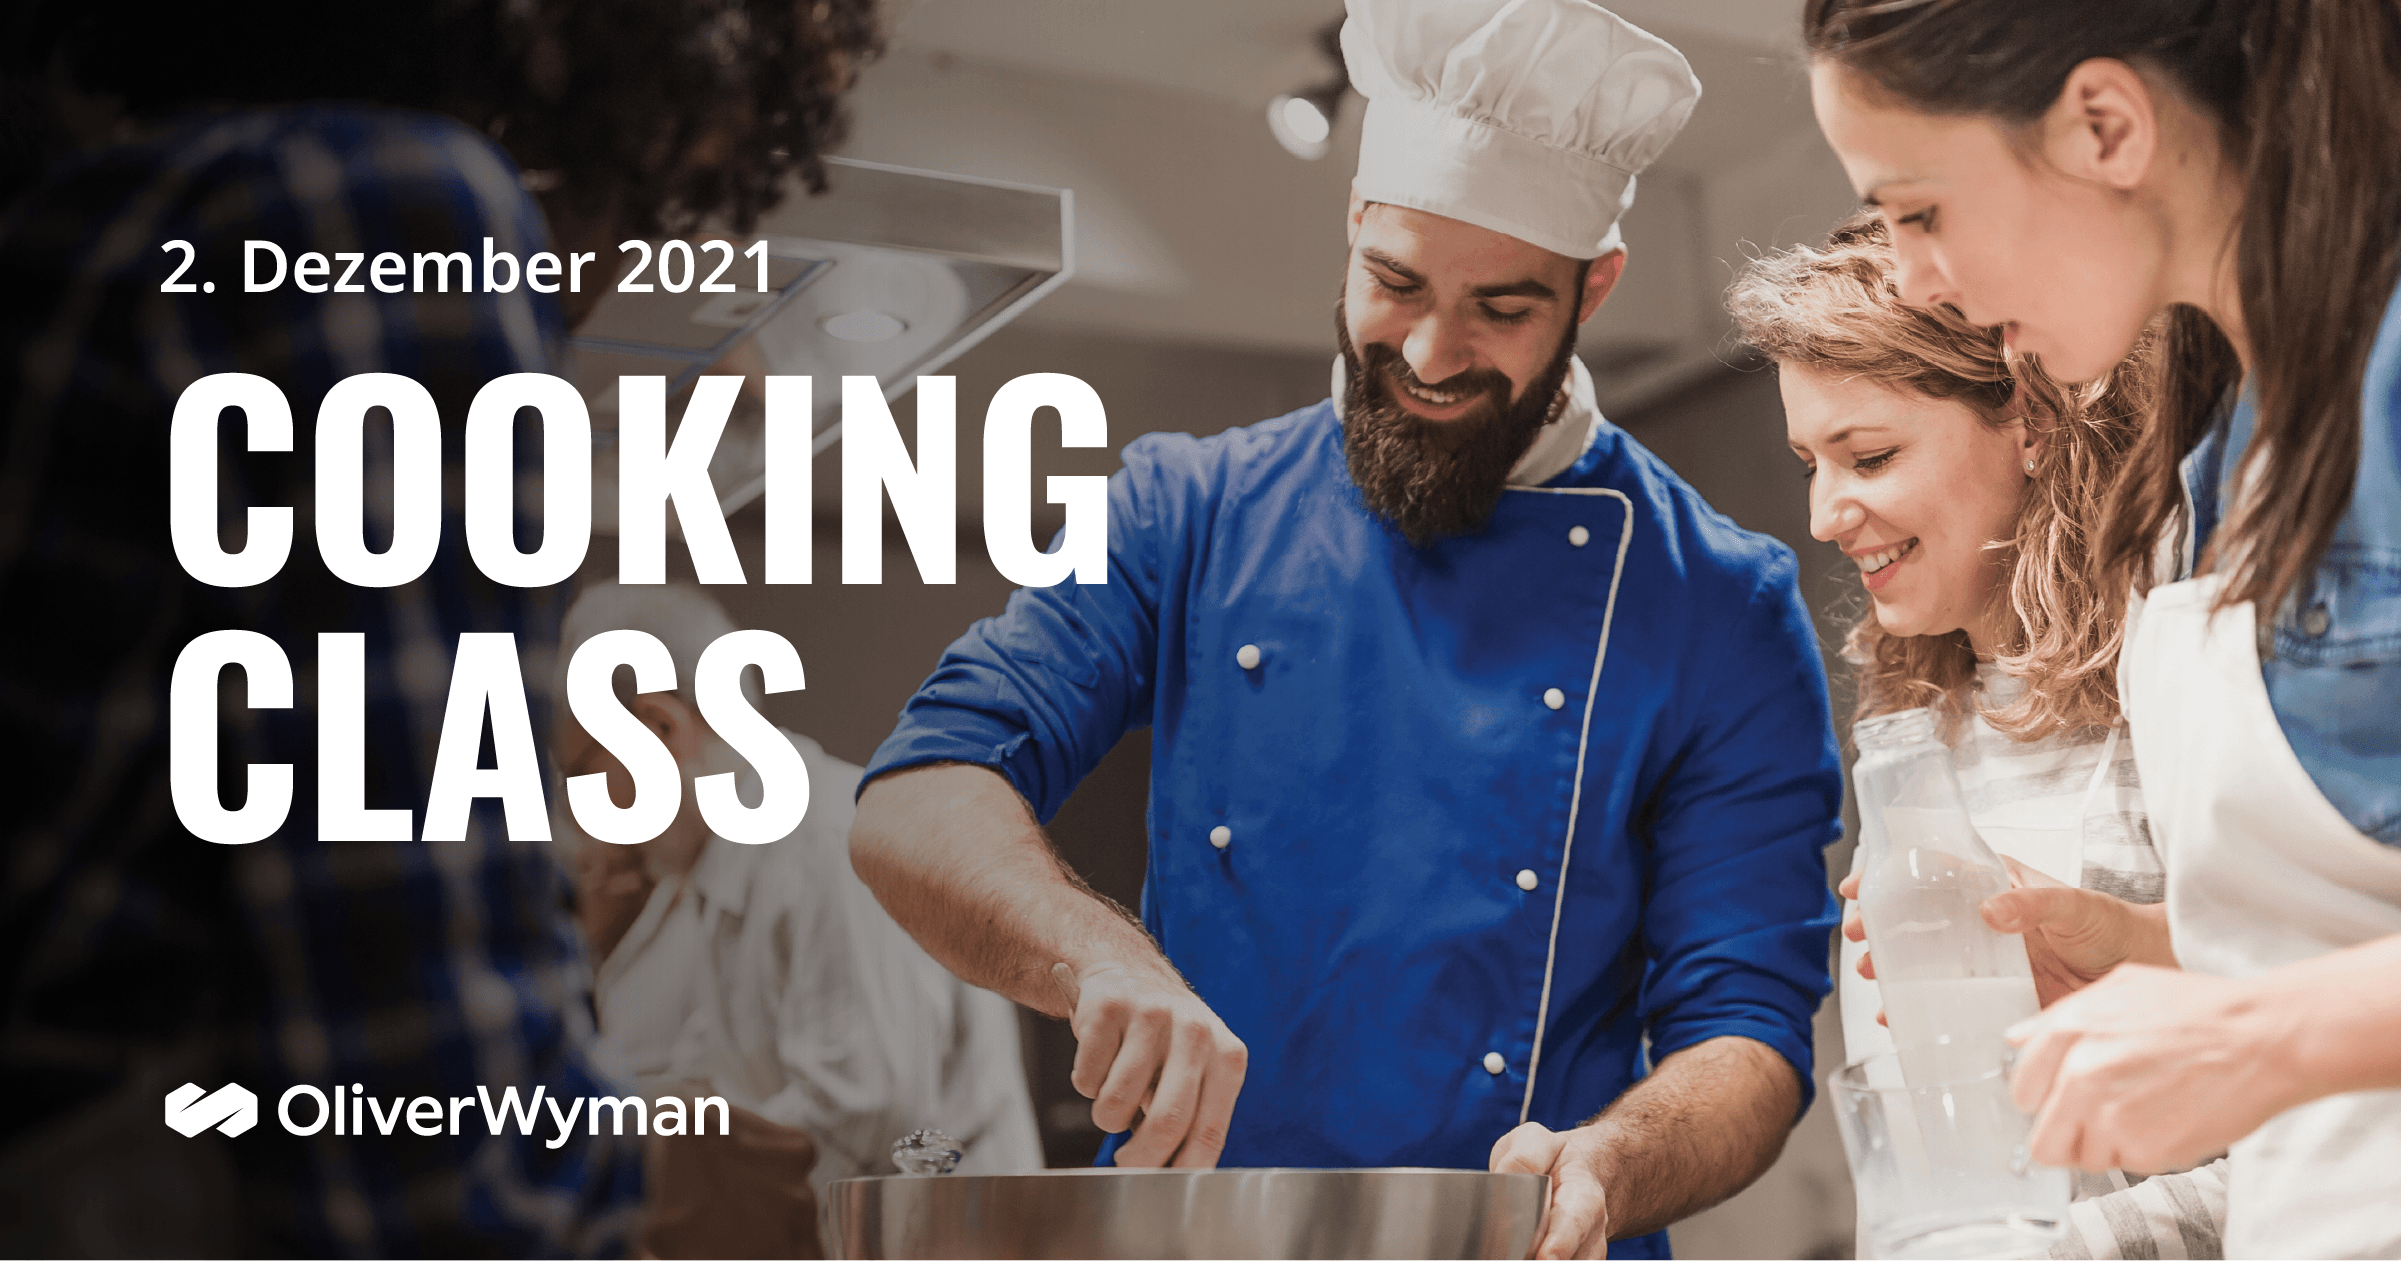 Cooking class with Oliver Wyman